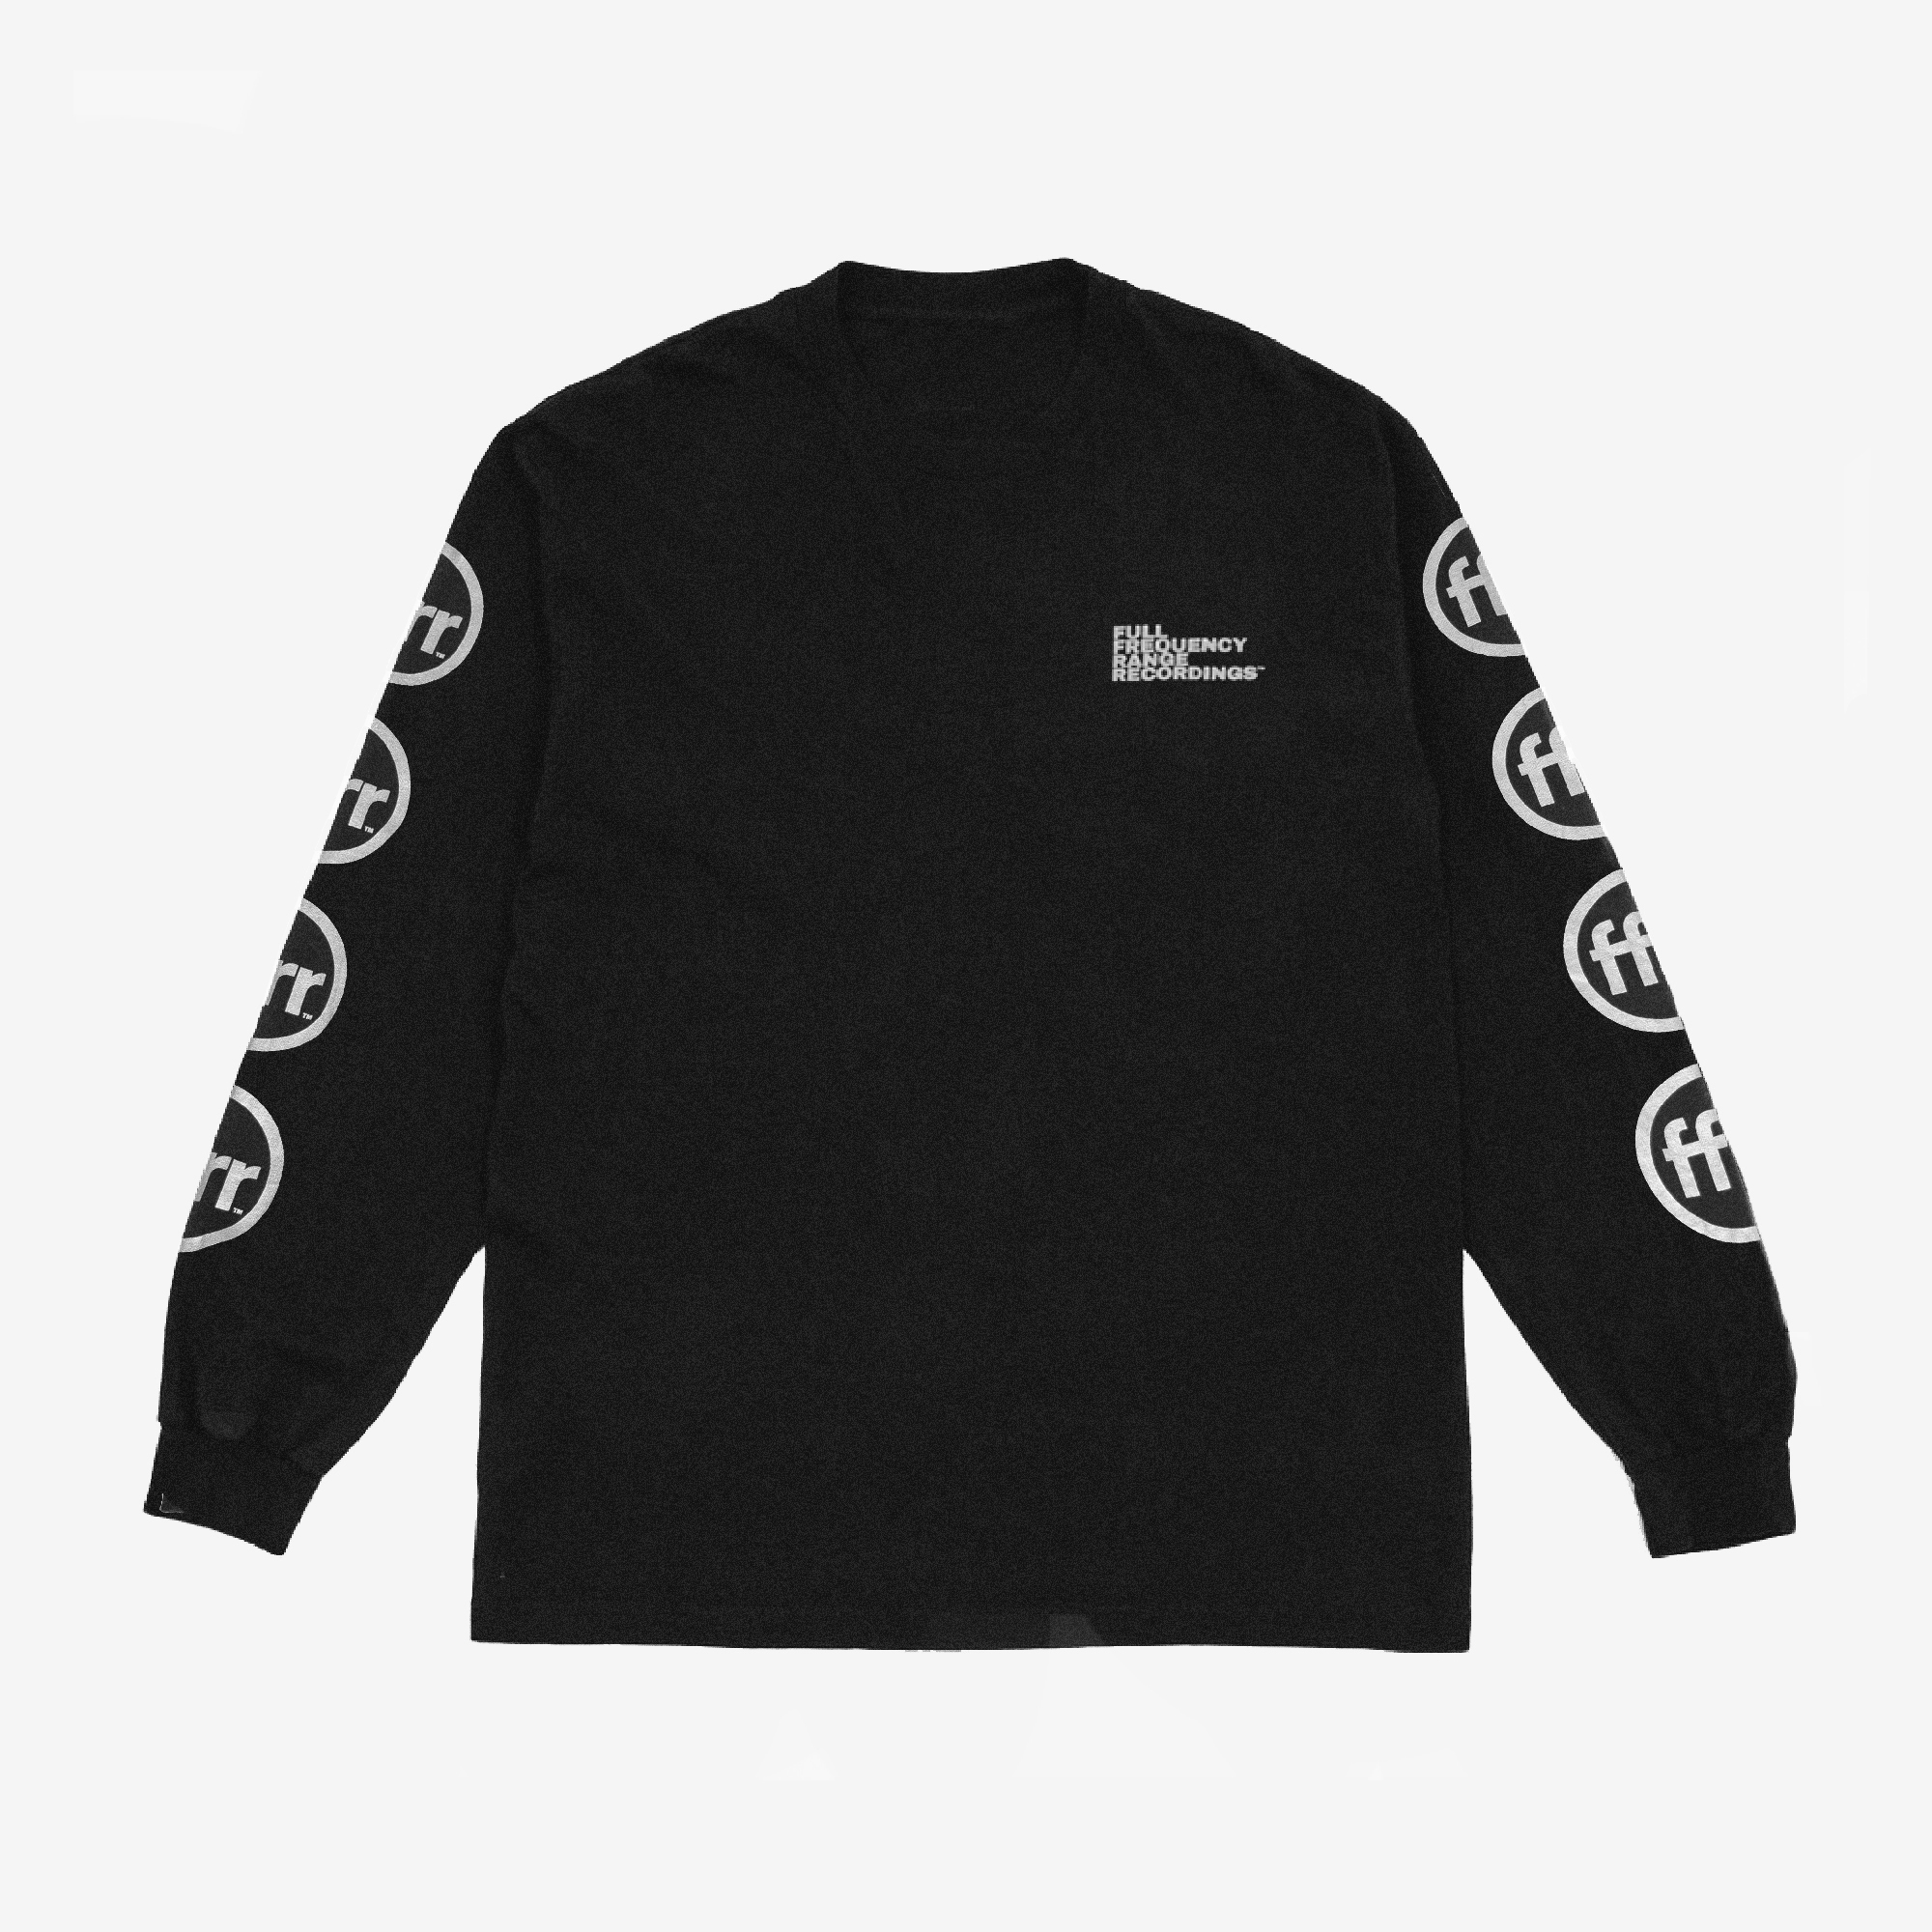 Circle Logo Long-Sleeve T-Shirt | FFRR Records Official Store